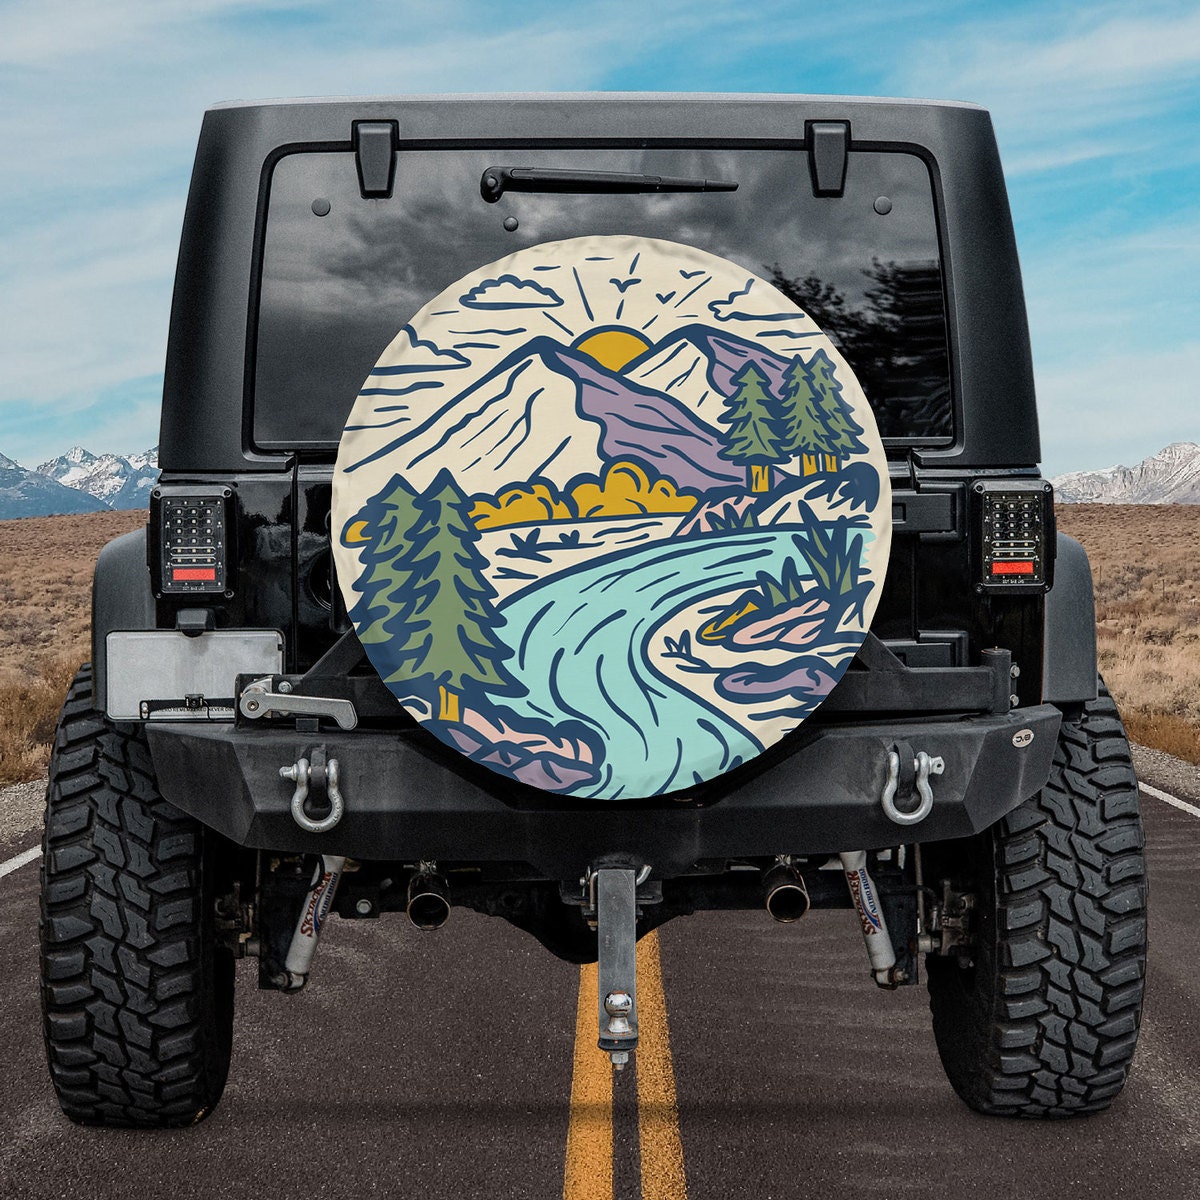 Rv Camper Tire Cover Etsy Singapore